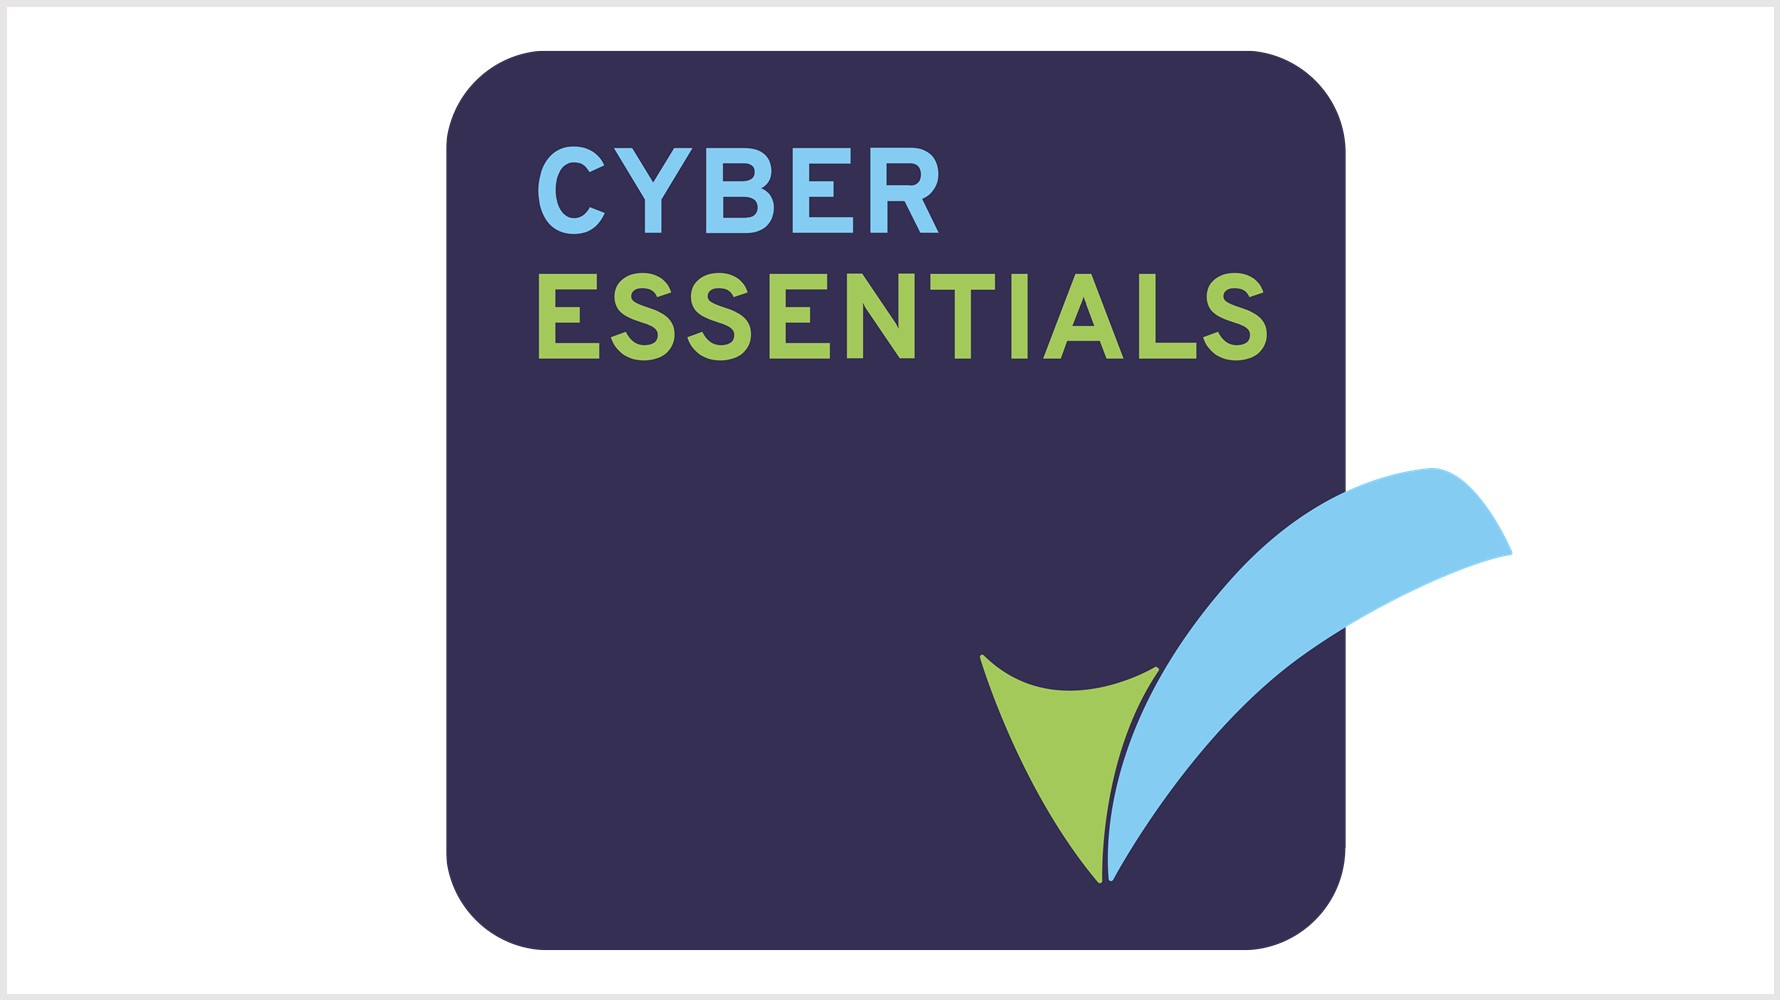 Cwt Secures Cyber Essentials Certification